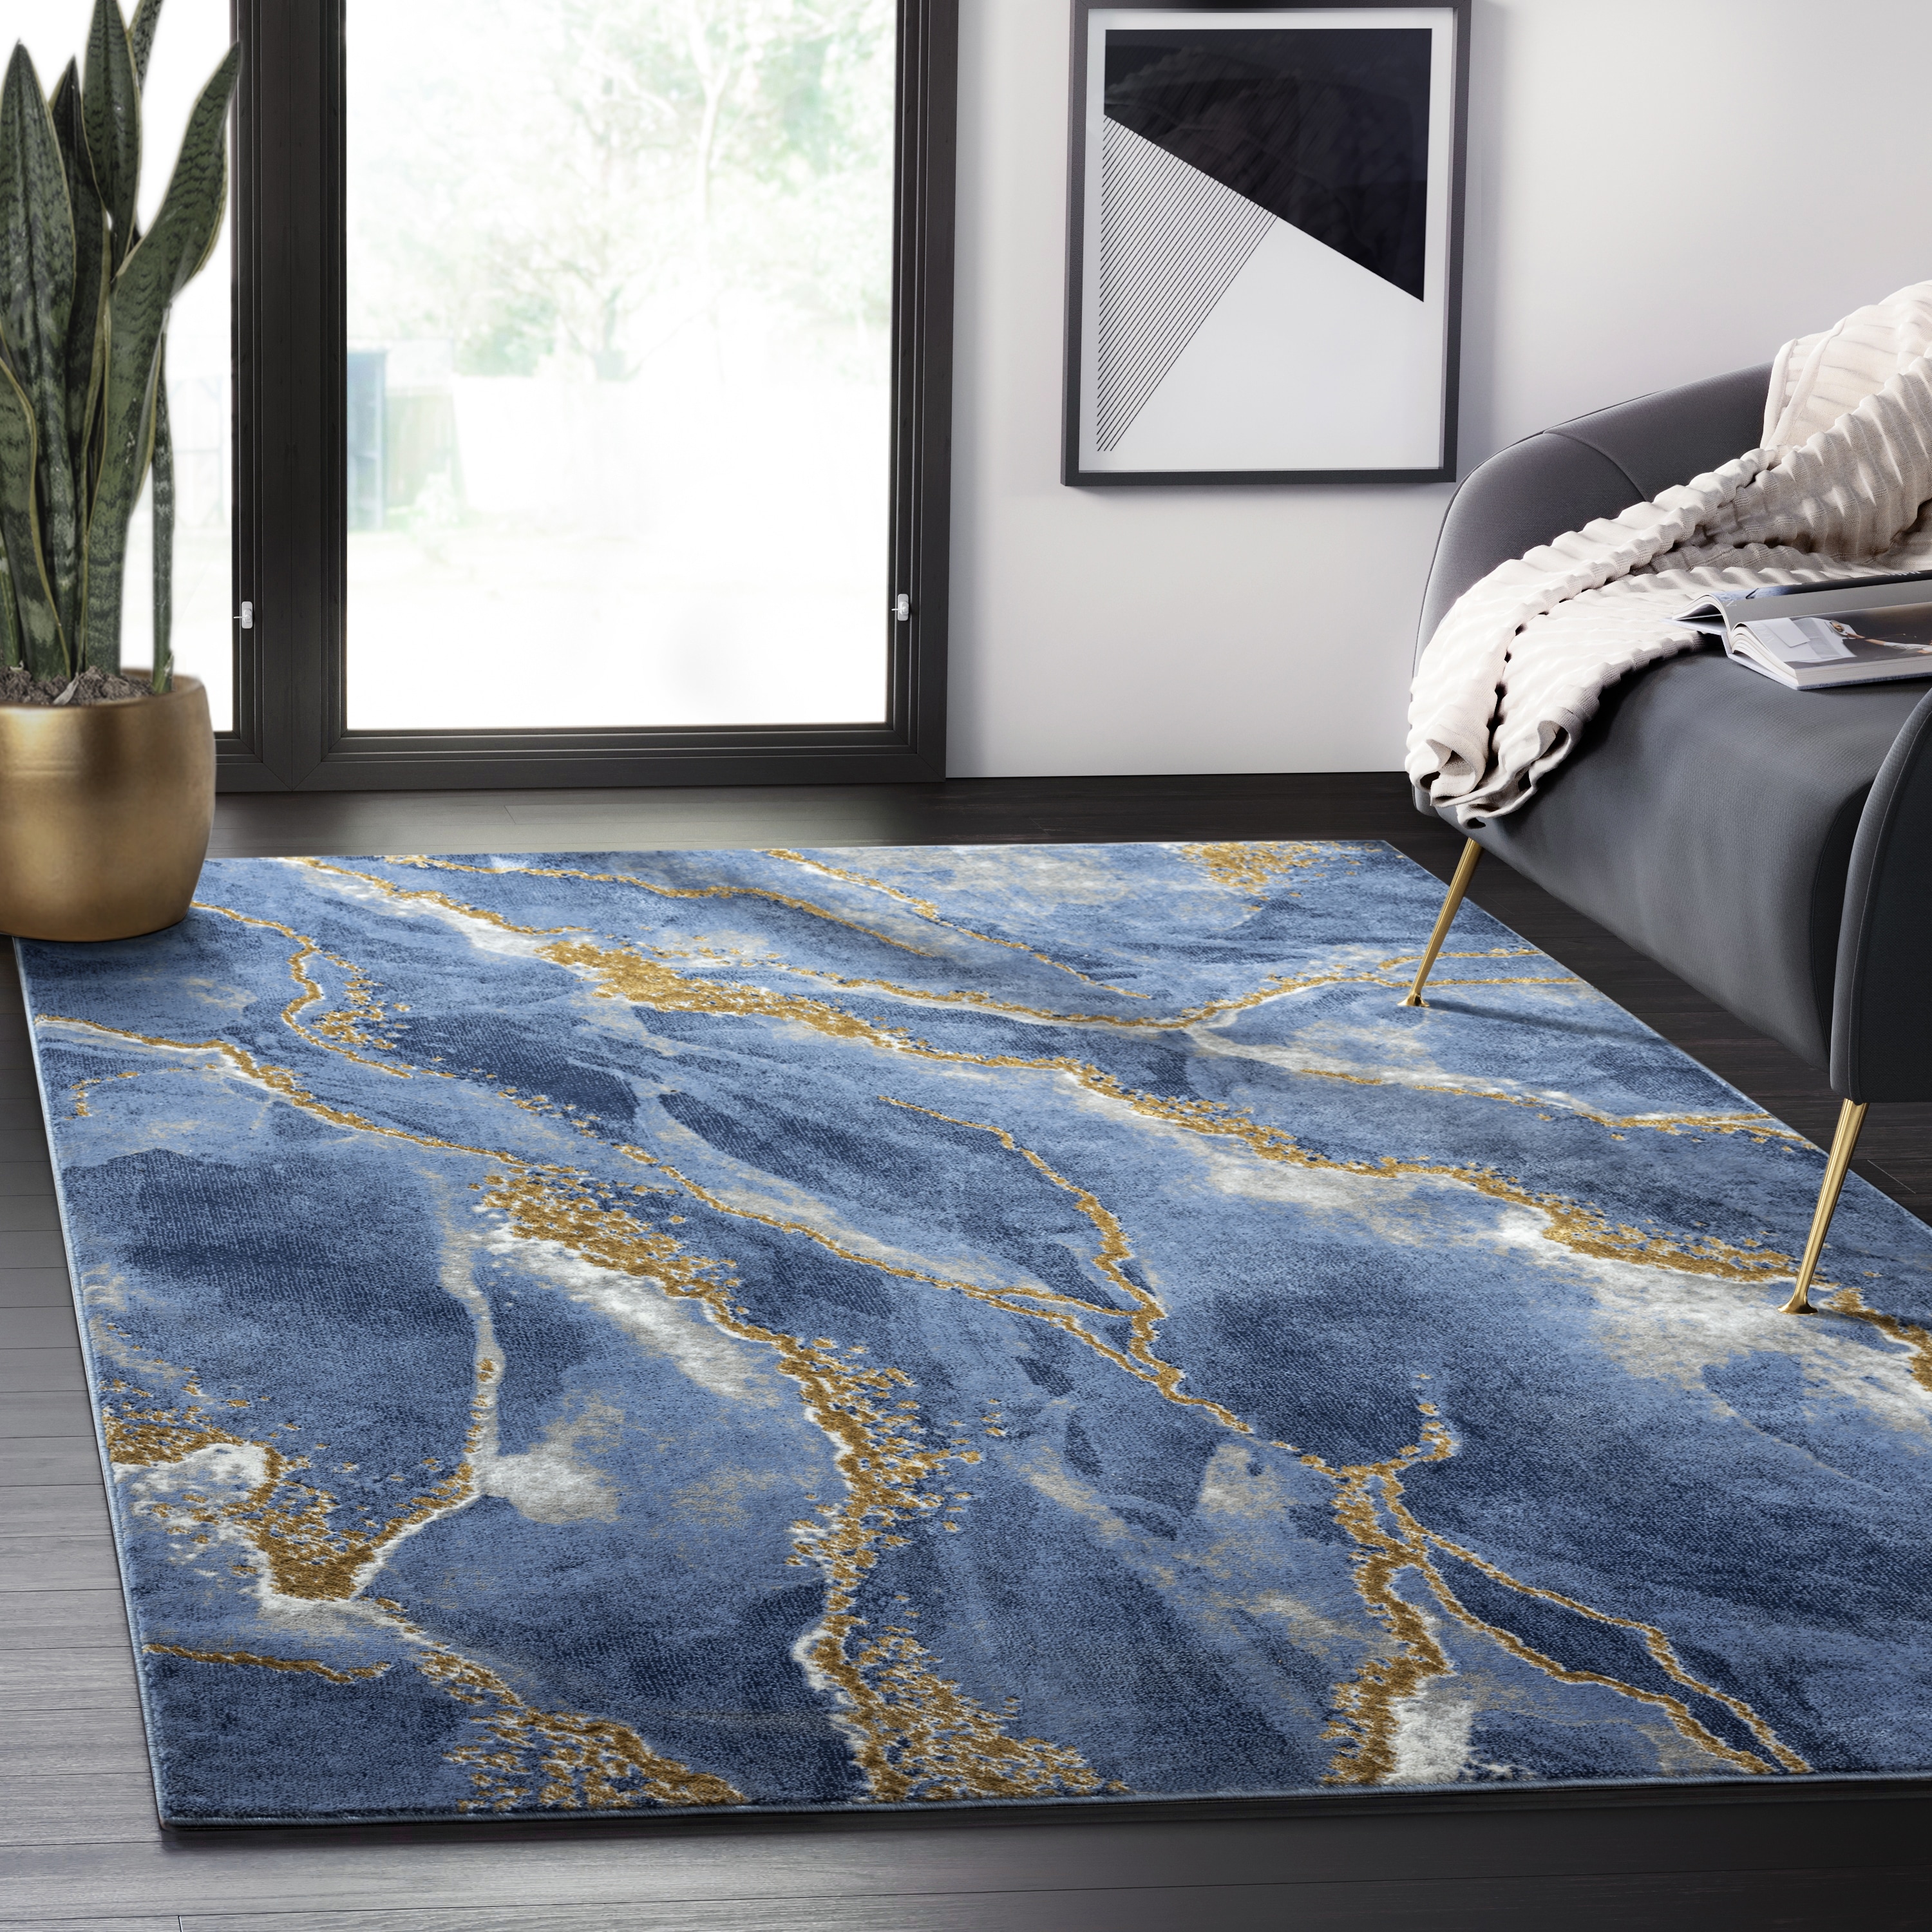 https://ak1.ostkcdn.com/images/products/is/images/direct/b4609eb8f77a17bf025baa7d2f6c3a7dbfe7e125/Abani-Luna-Contemporary-Marble-Metallic-Gold-Area-Rug.jpg